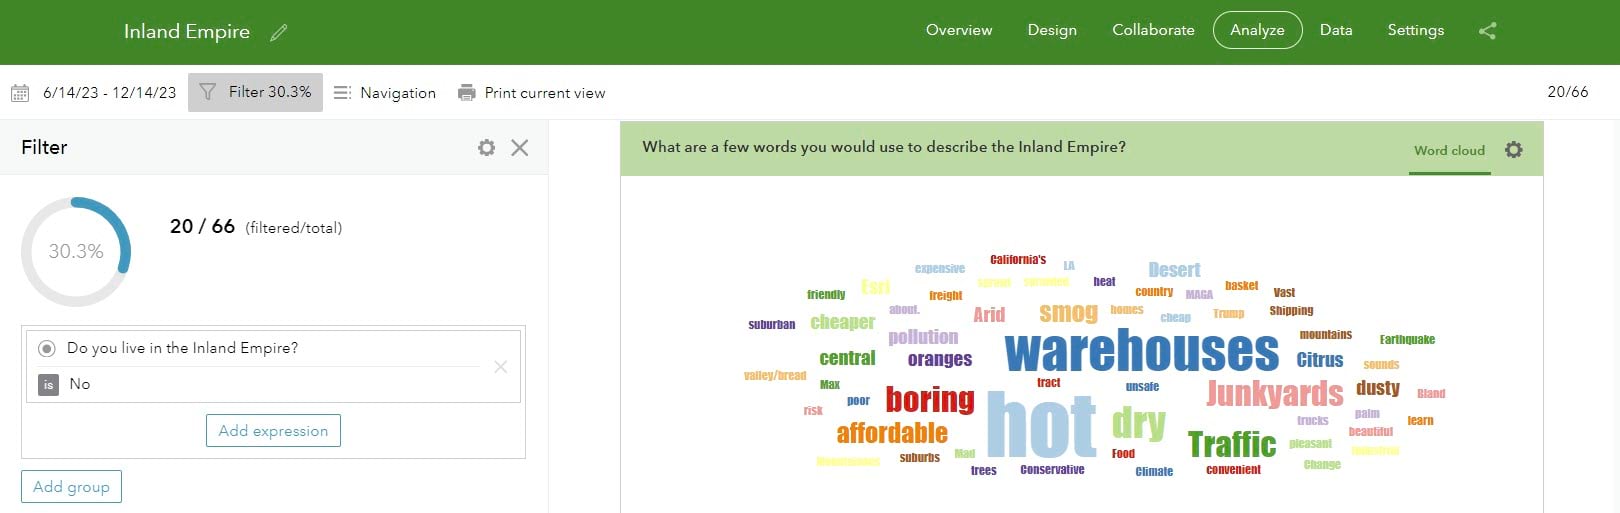 The word cloud of the 20 responses who answered "no" to living in the Inland Empire has "hot" front and center, followed by the word "warehouses." The next largest size includes "boring," "junkyards," "dry," and "traffic."